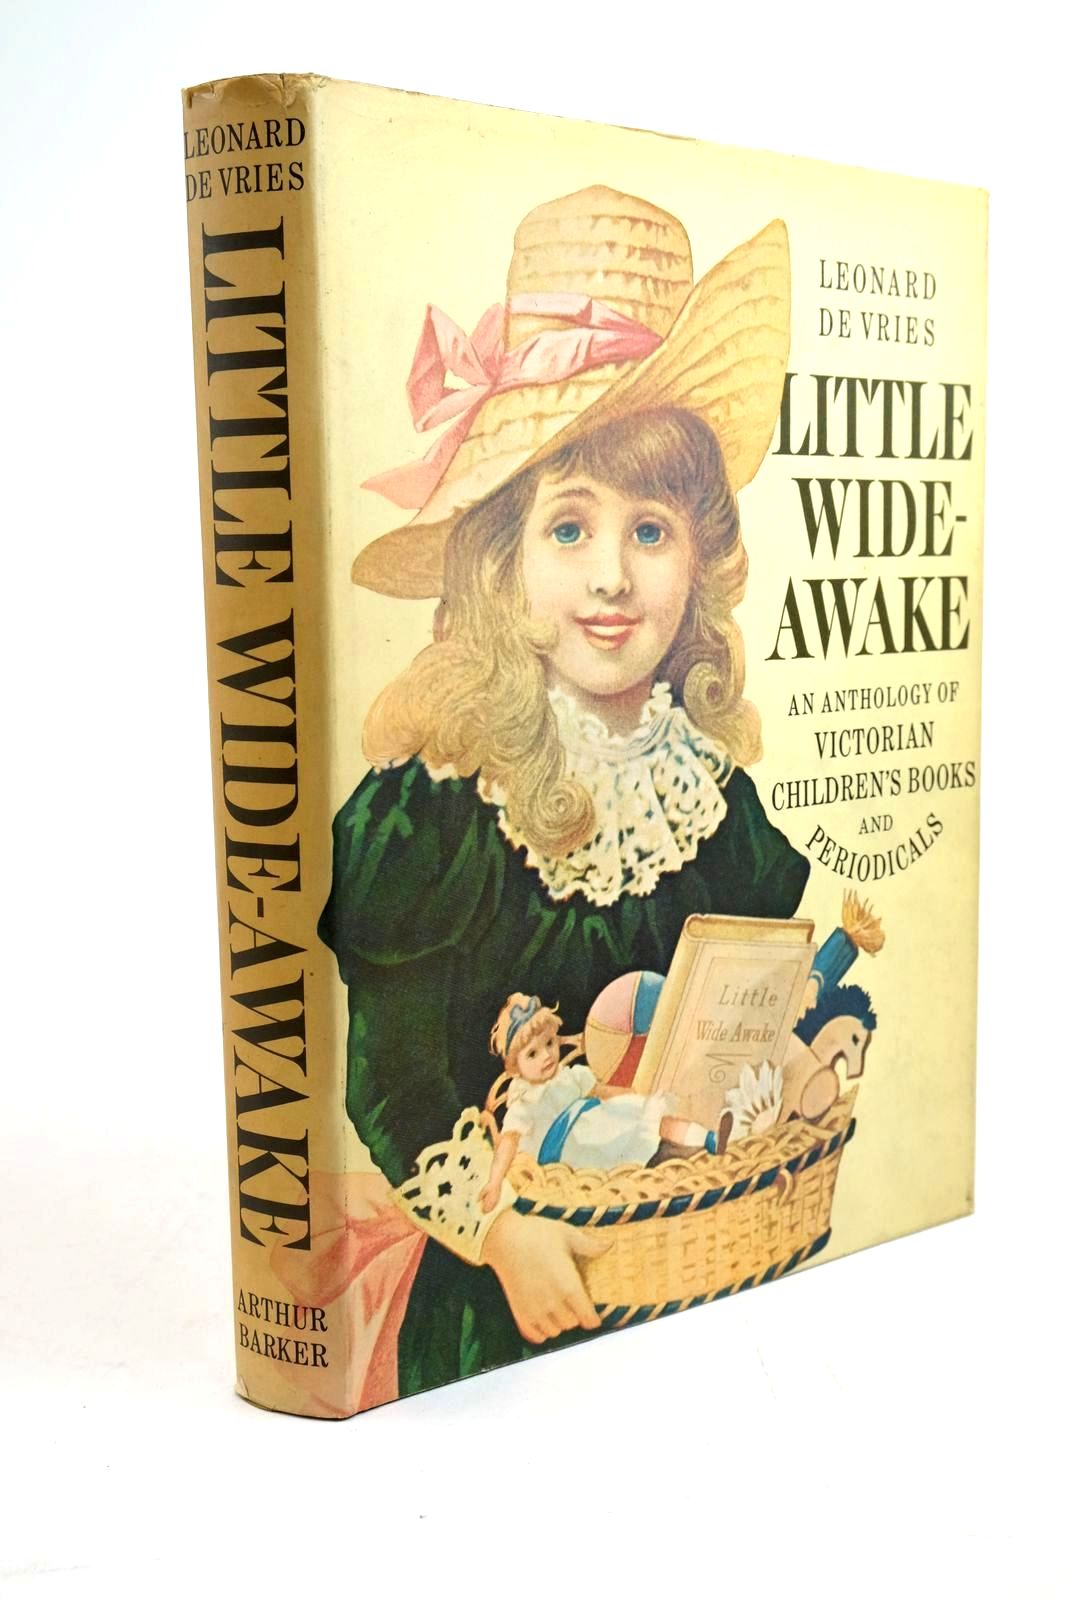 Photo of LITTLE WIDE-AWAKE written by De Vries, Leonard published by Arthur Barker Limited (STOCK CODE: 1321471)  for sale by Stella & Rose's Books